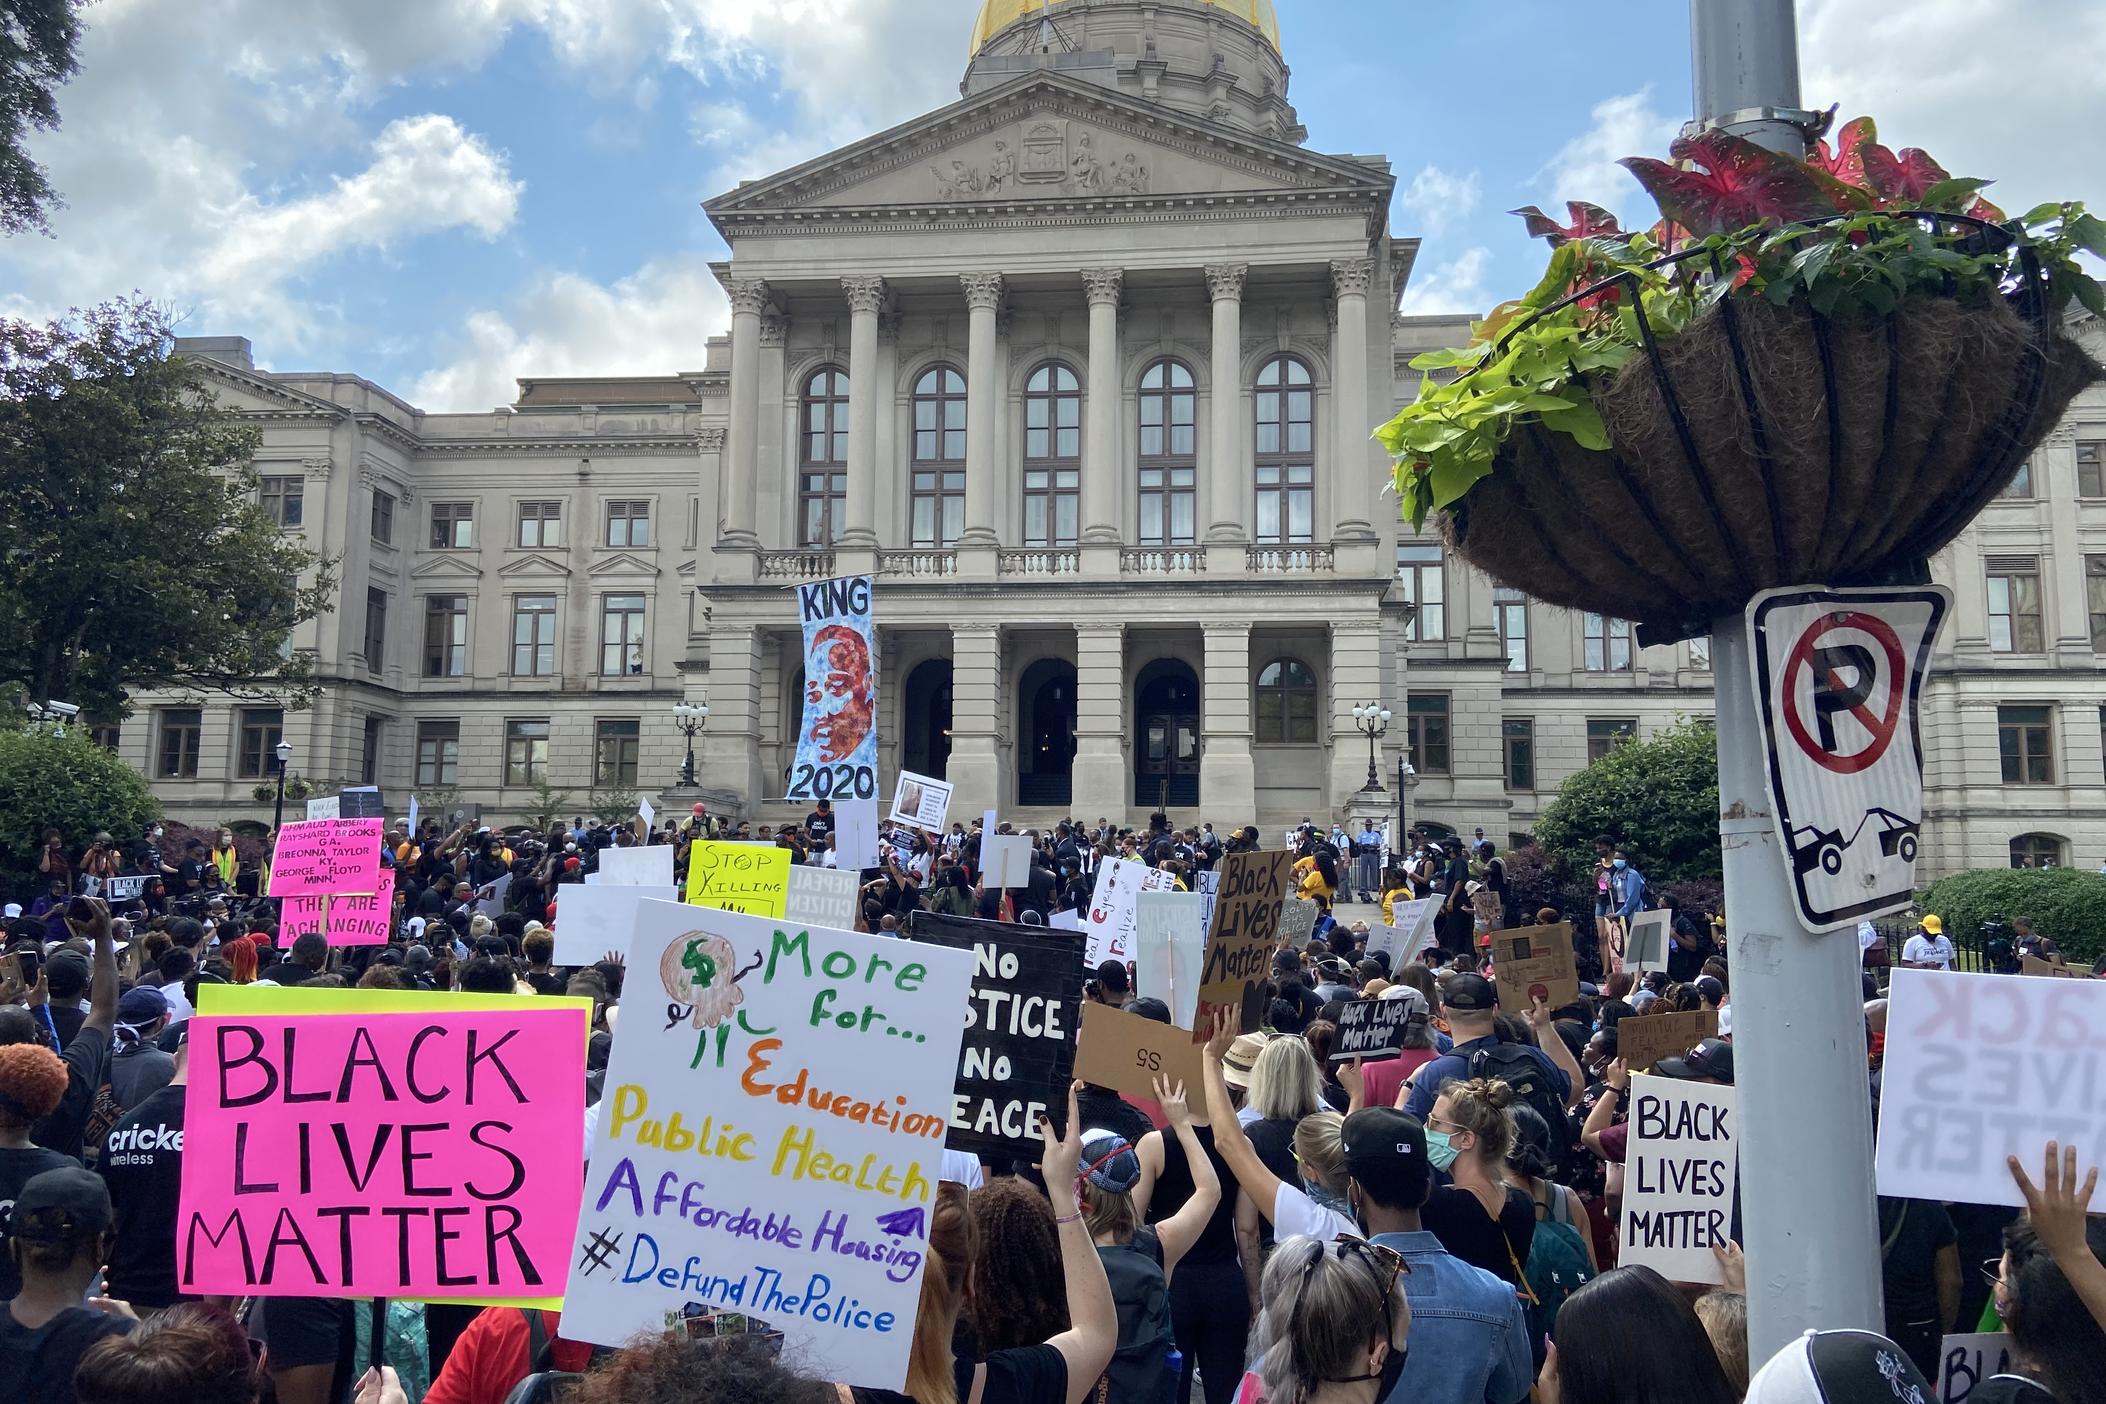 'March On Georgia' rally demonstrators head towards the Georgia State Capitol on June 15, 2020.